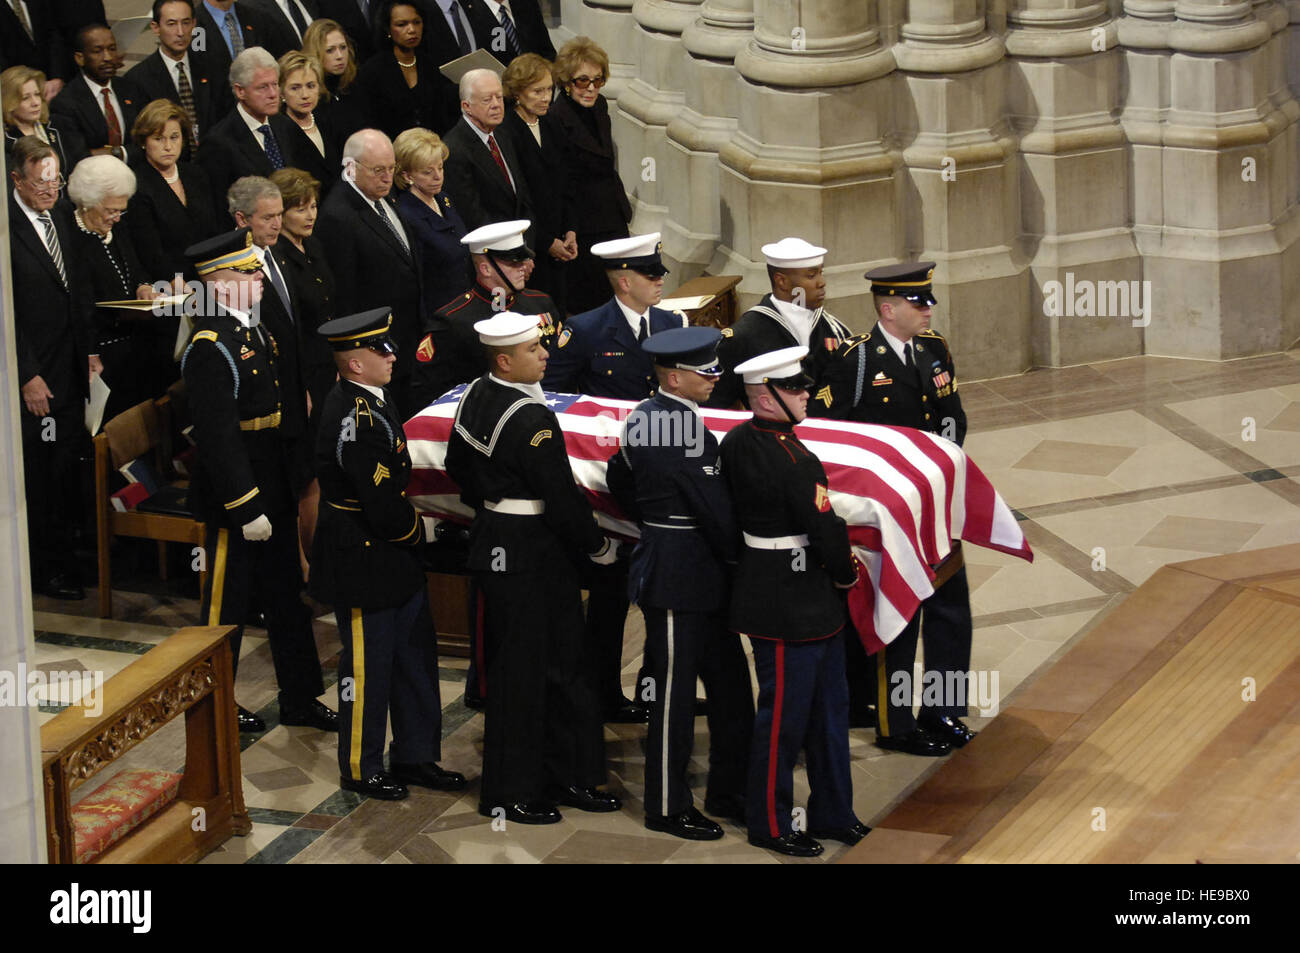 WASHINGON -- The casket of President Gerald R. Ford is carried past a group that includes President George W. Bush, first lady Laura Bush and Presidents George Bush Sr., Bill Clinton and Jimmy Carter at the National Cathedral in Washington Jan 2, 2007.  The president's final resting place will be in his hometown of Grand Rapids, Mich., at a site just north of the Gerald R. Ford Museum.  Senior Airman Daniel R. DeCook)() Stock Photo